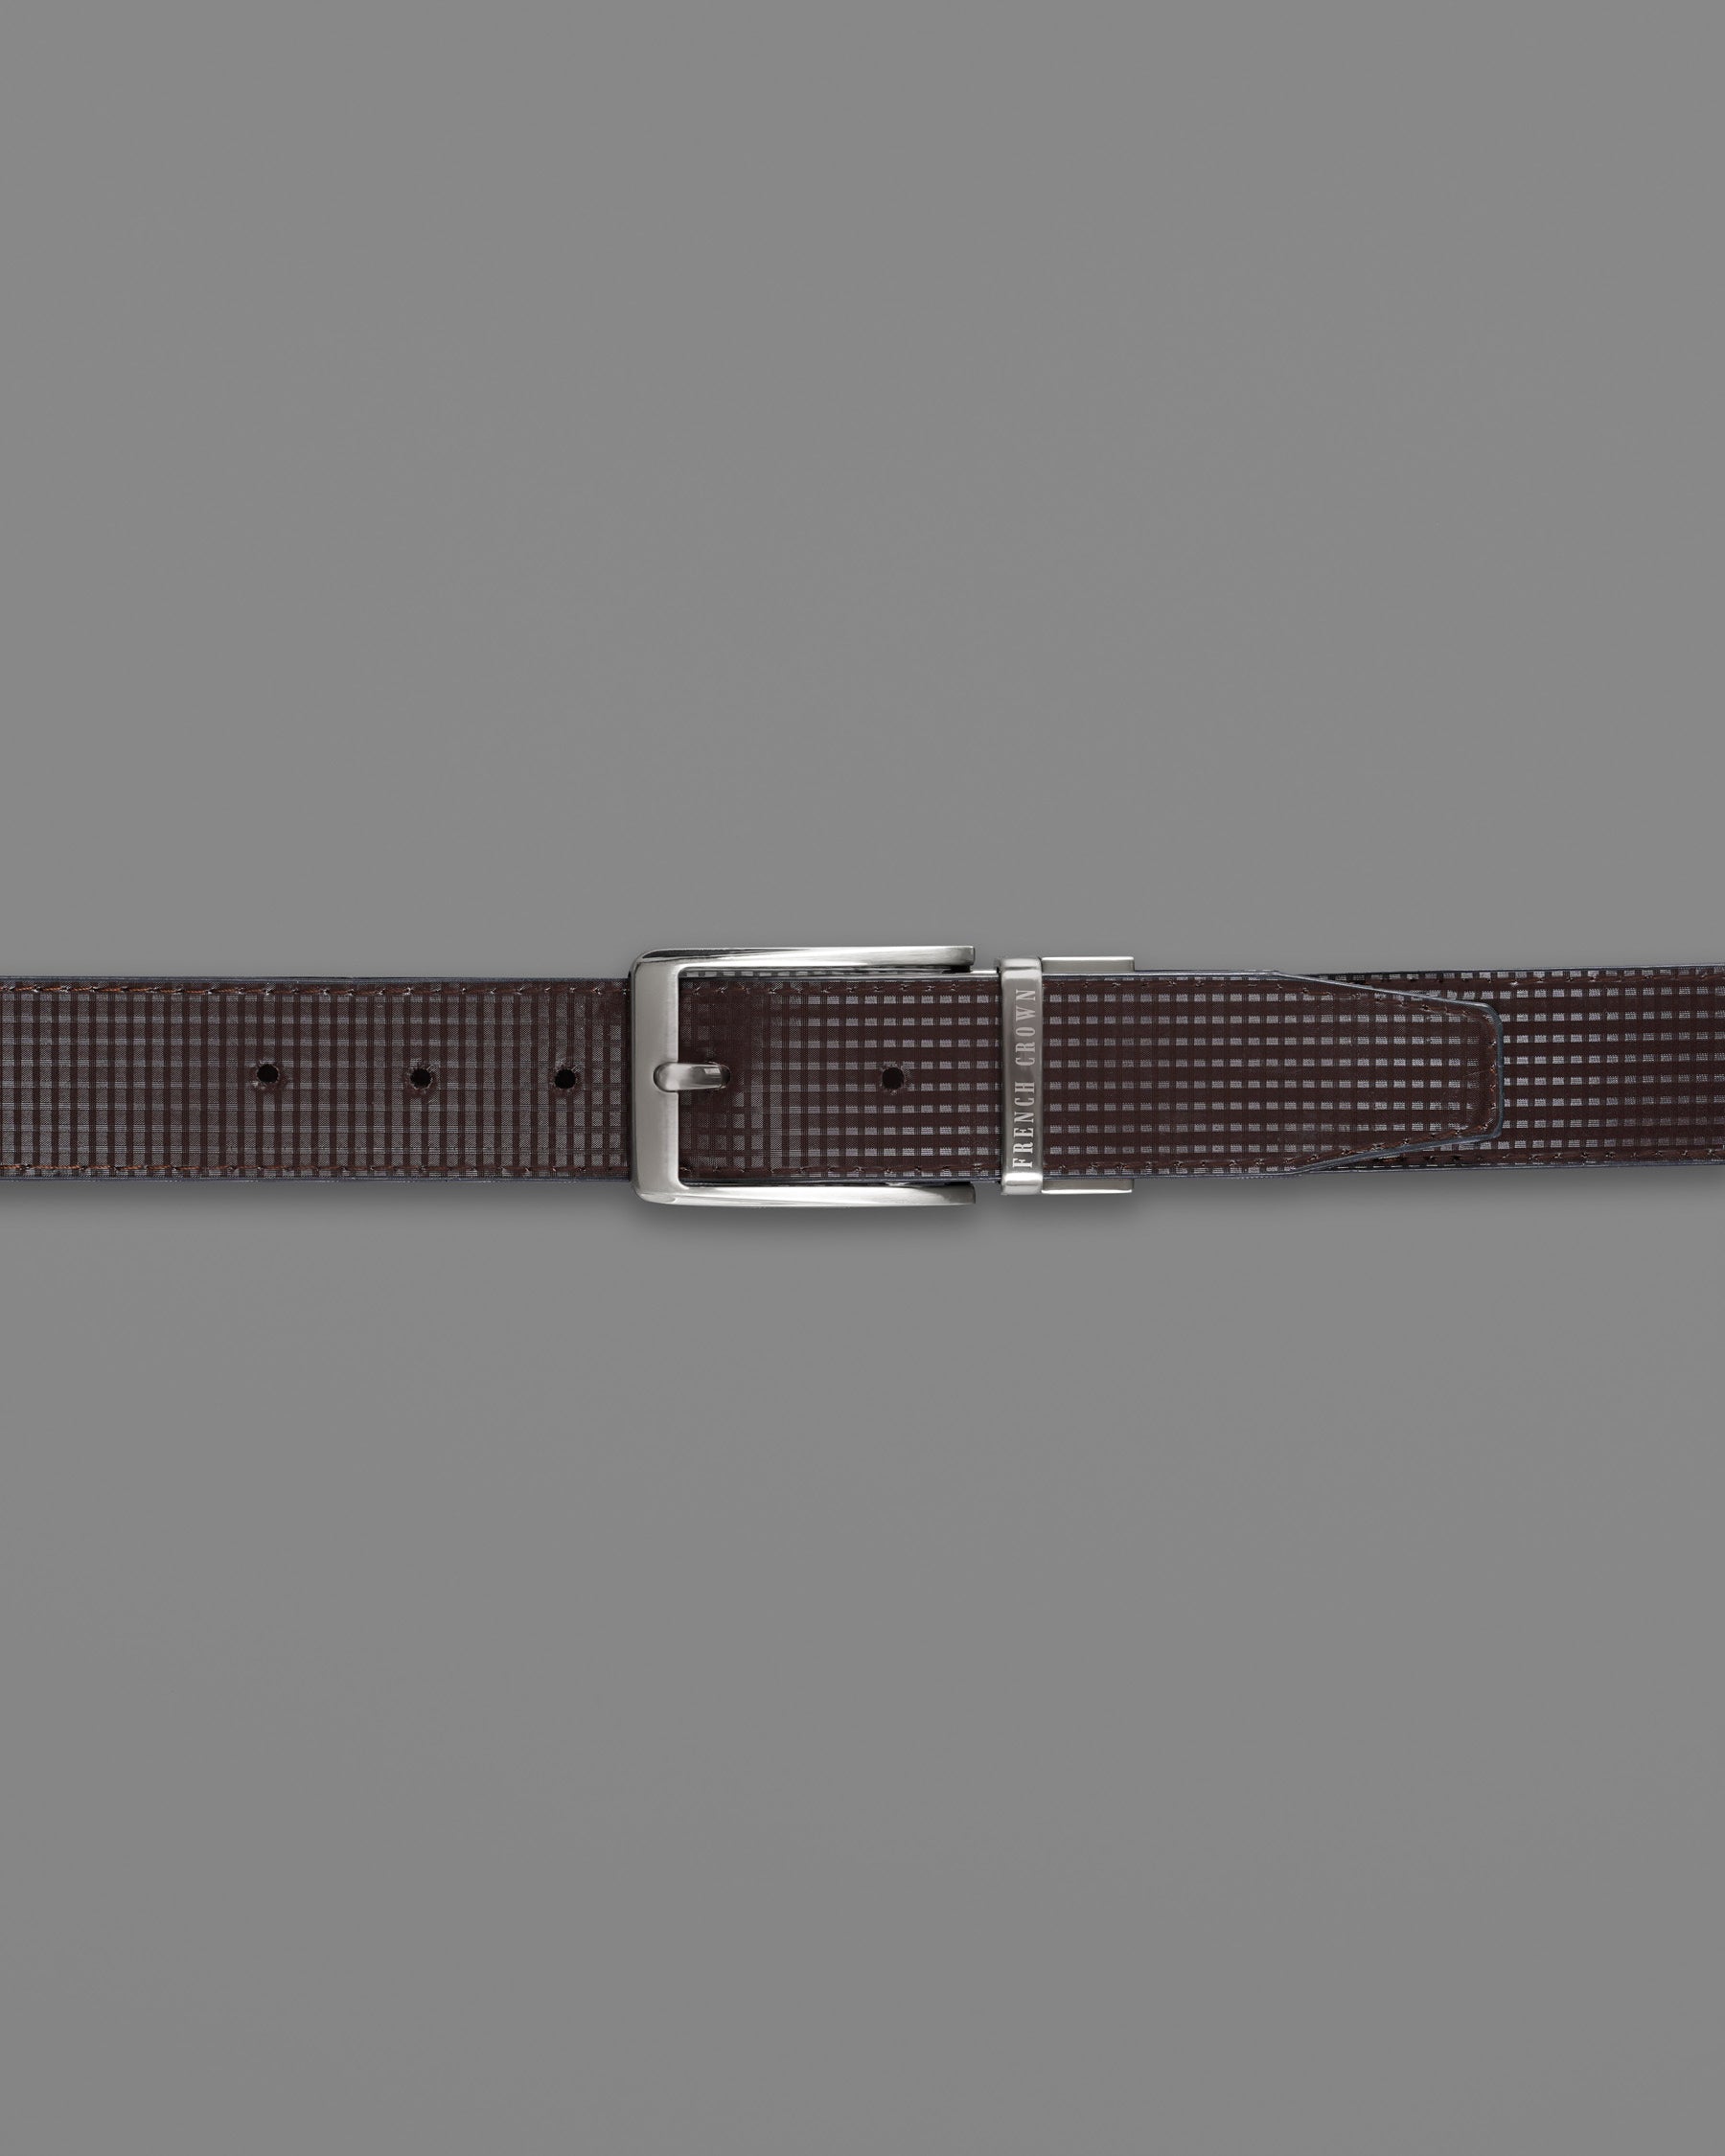 Silver Shiny Buckle with Jade Black and Brown Leather Free Handcrafted Reversible Belt BT066-28, BT066-30, BT066-32, BT066-34, BT066-36, BT066-38